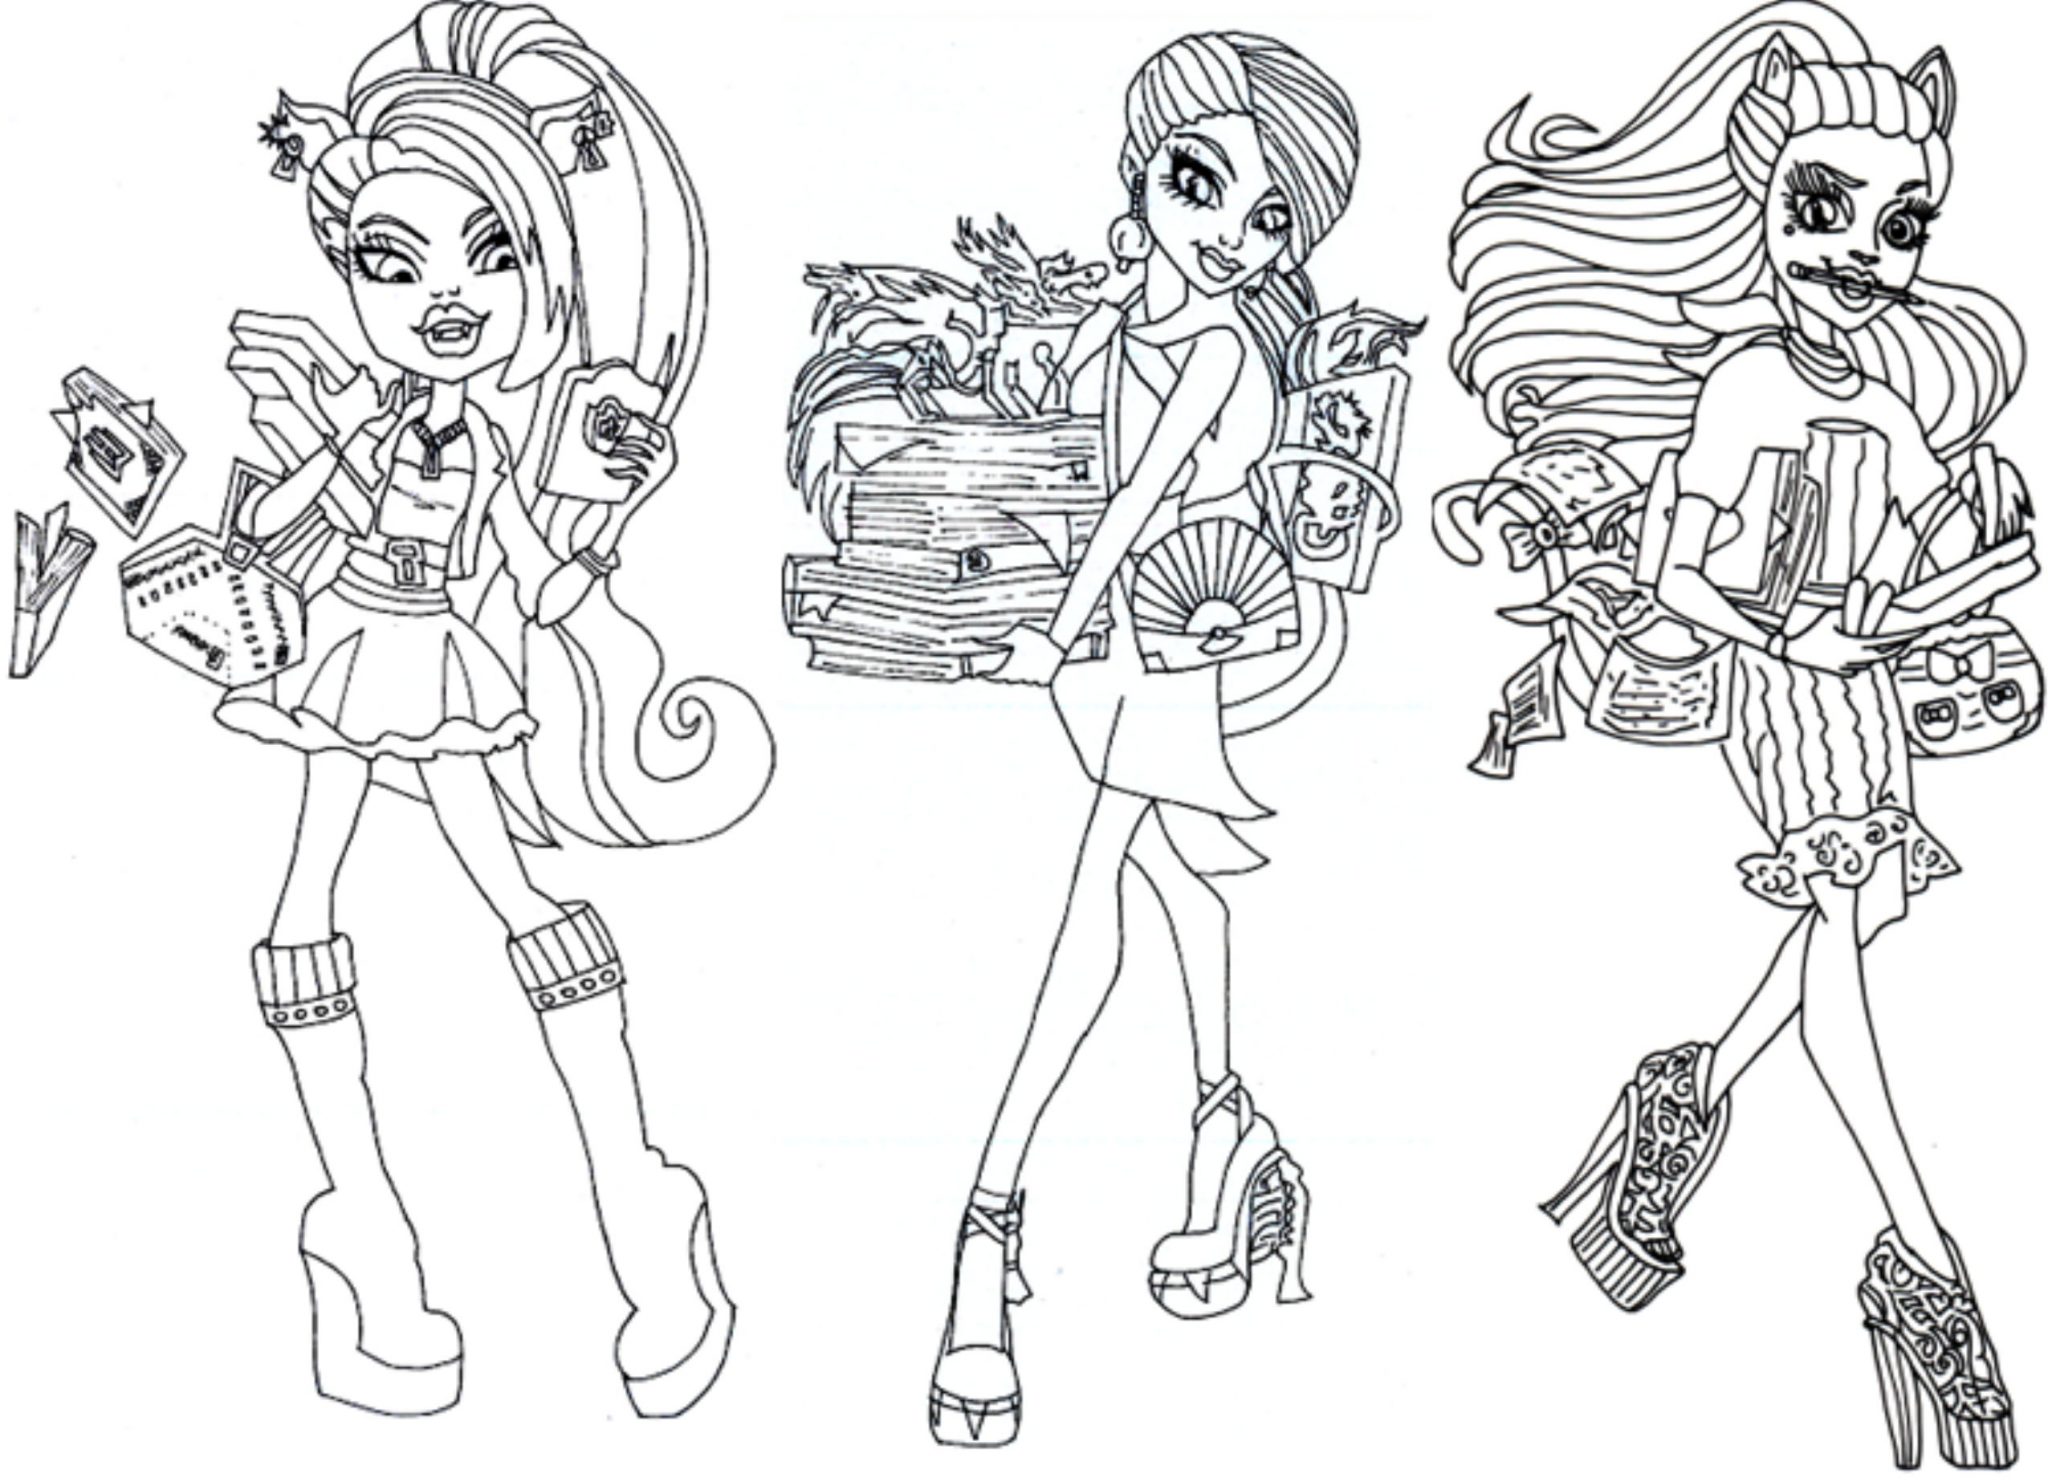 Print & Download - Monster High Coloring Pages Printable for Your Kids